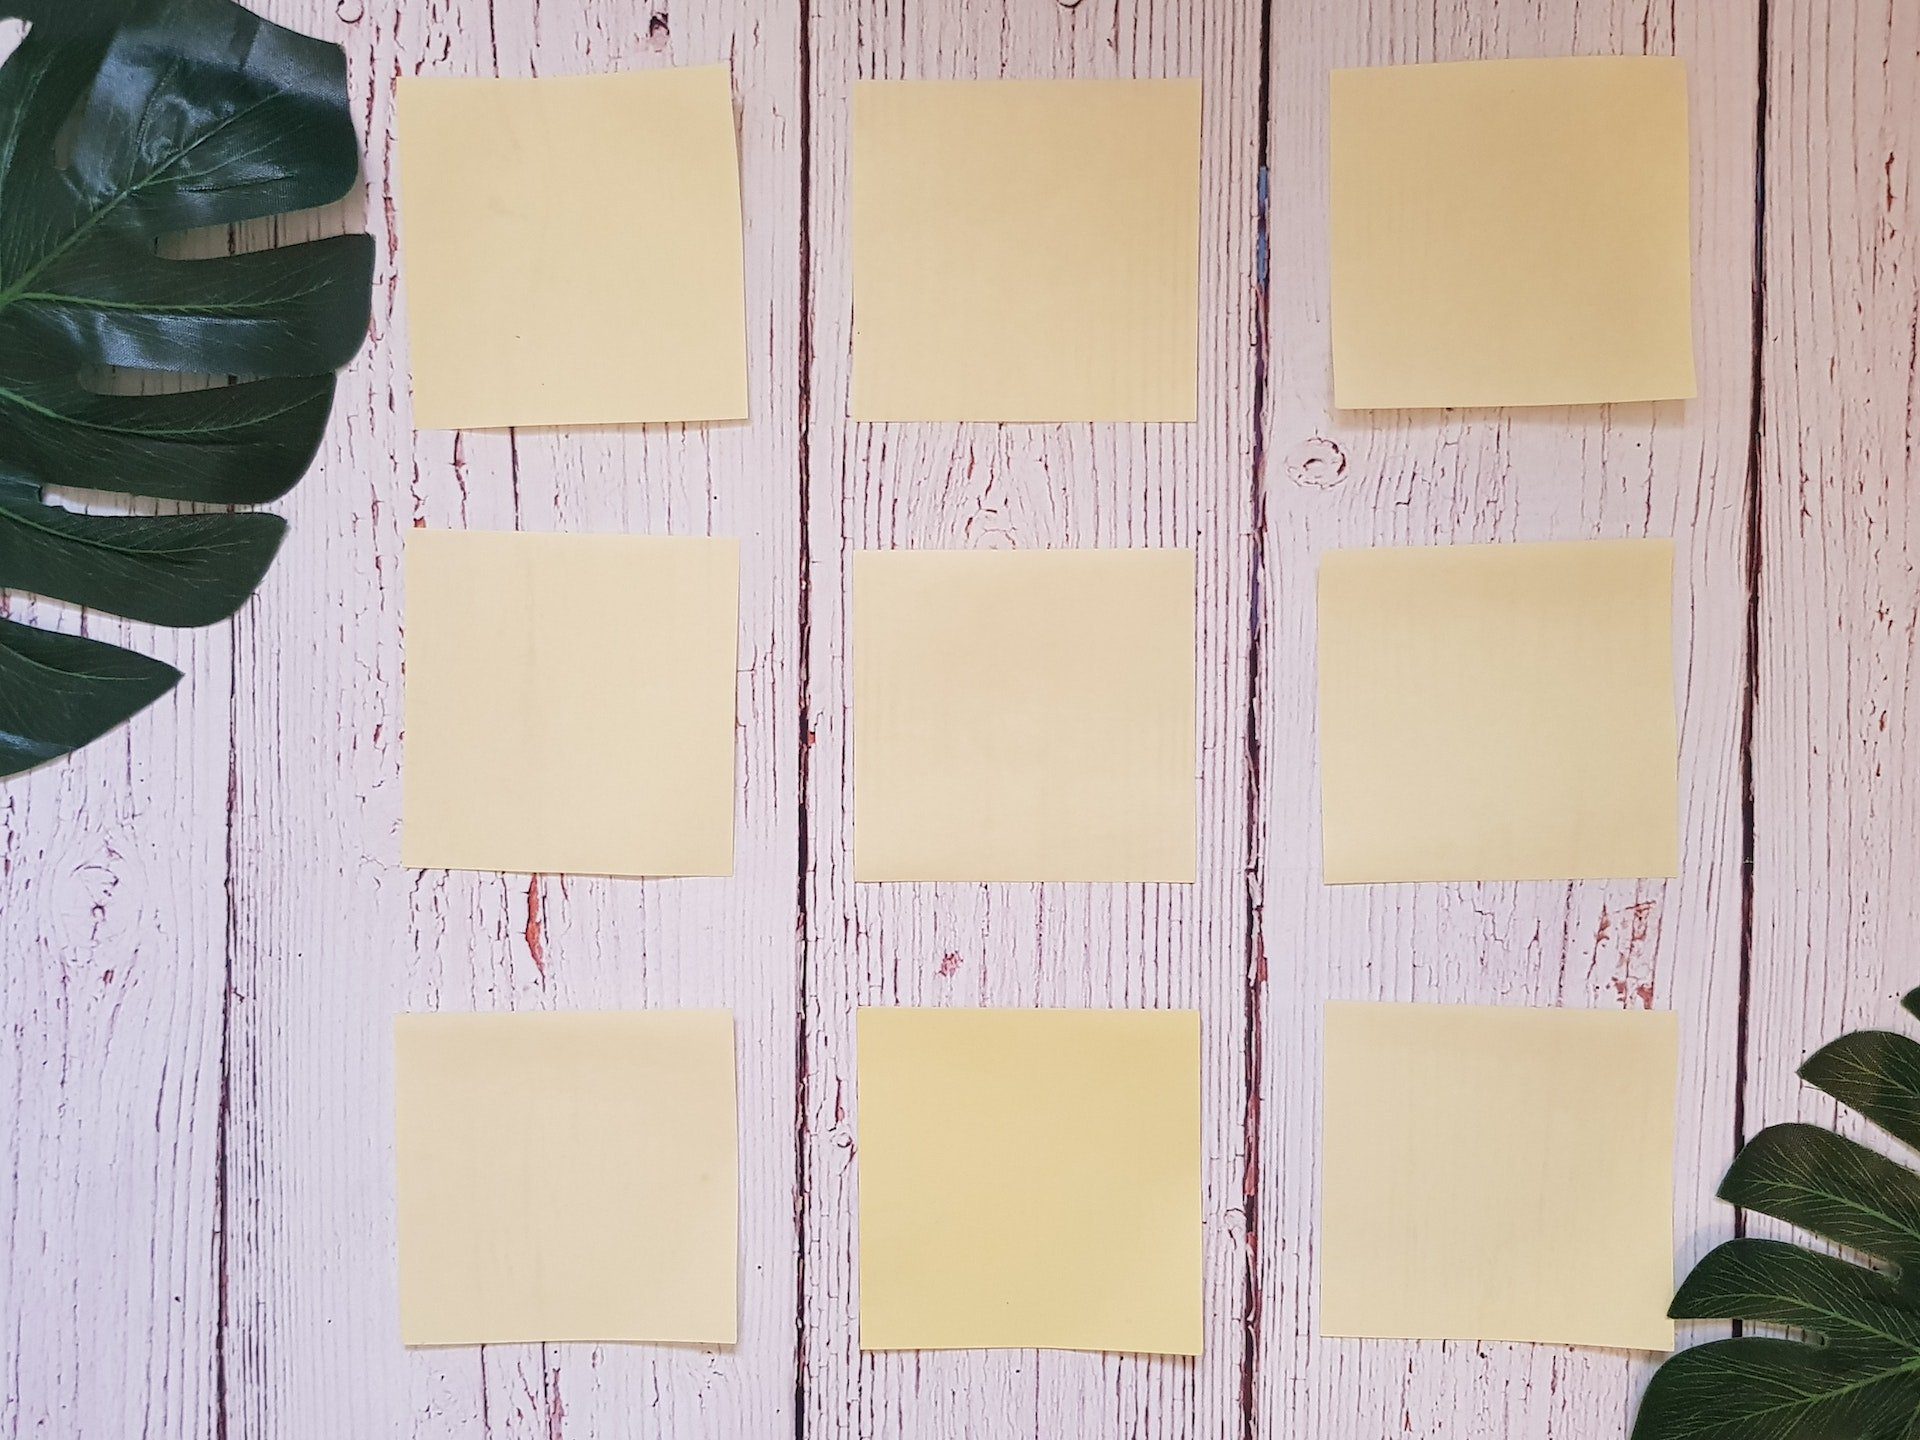 image of post-it notes on a wall to represent card sorting